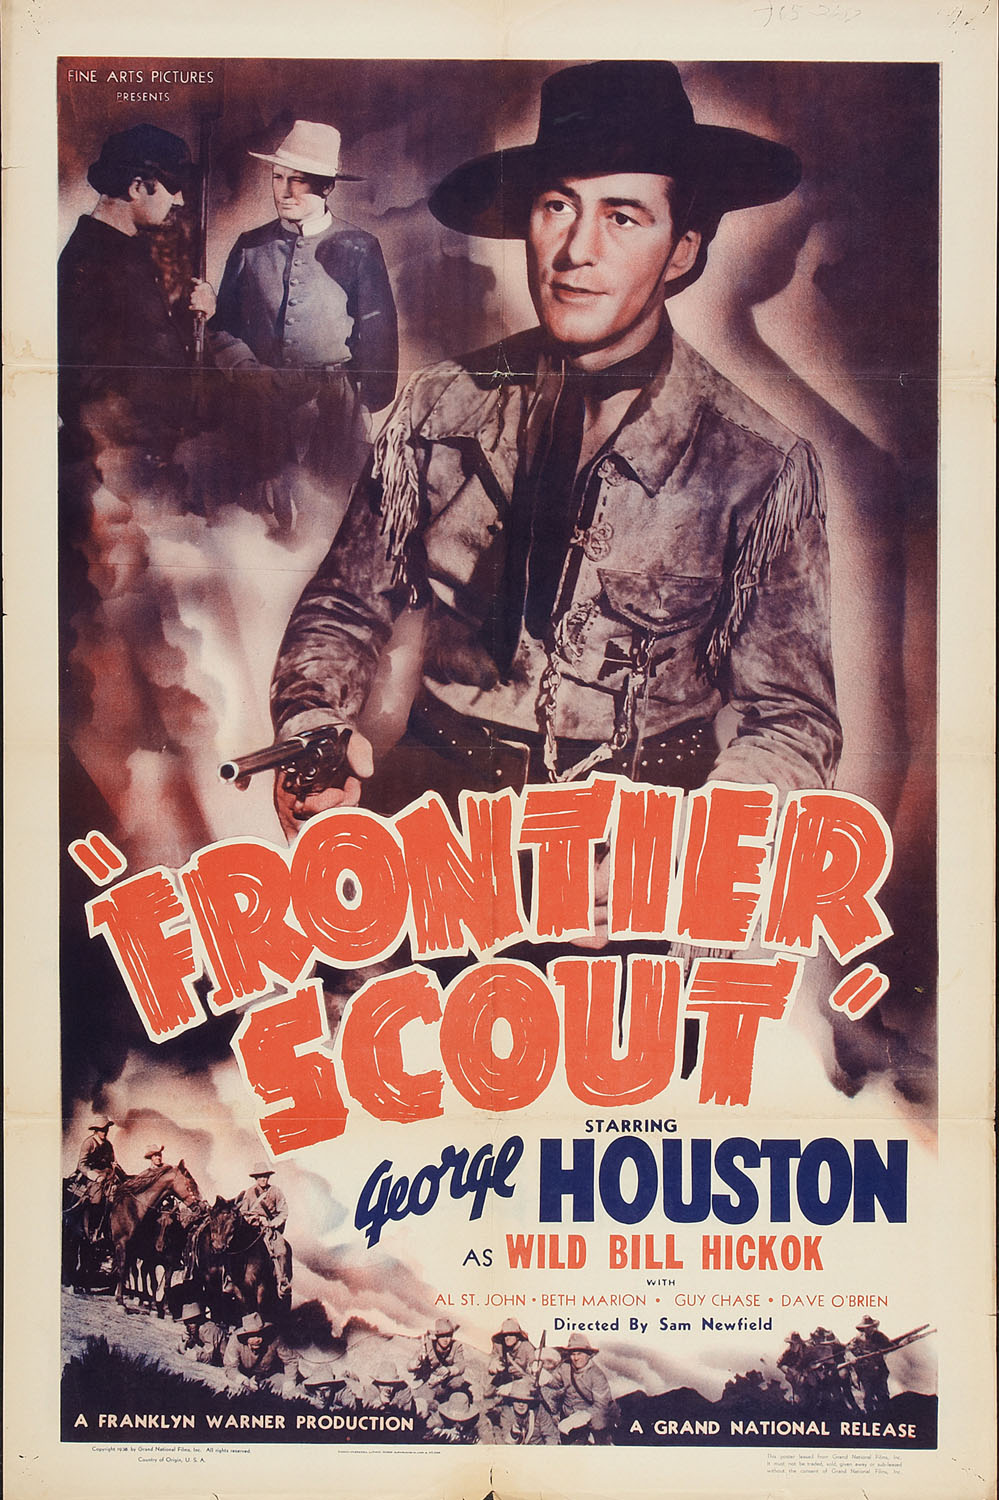 FRONTIER SCOUT